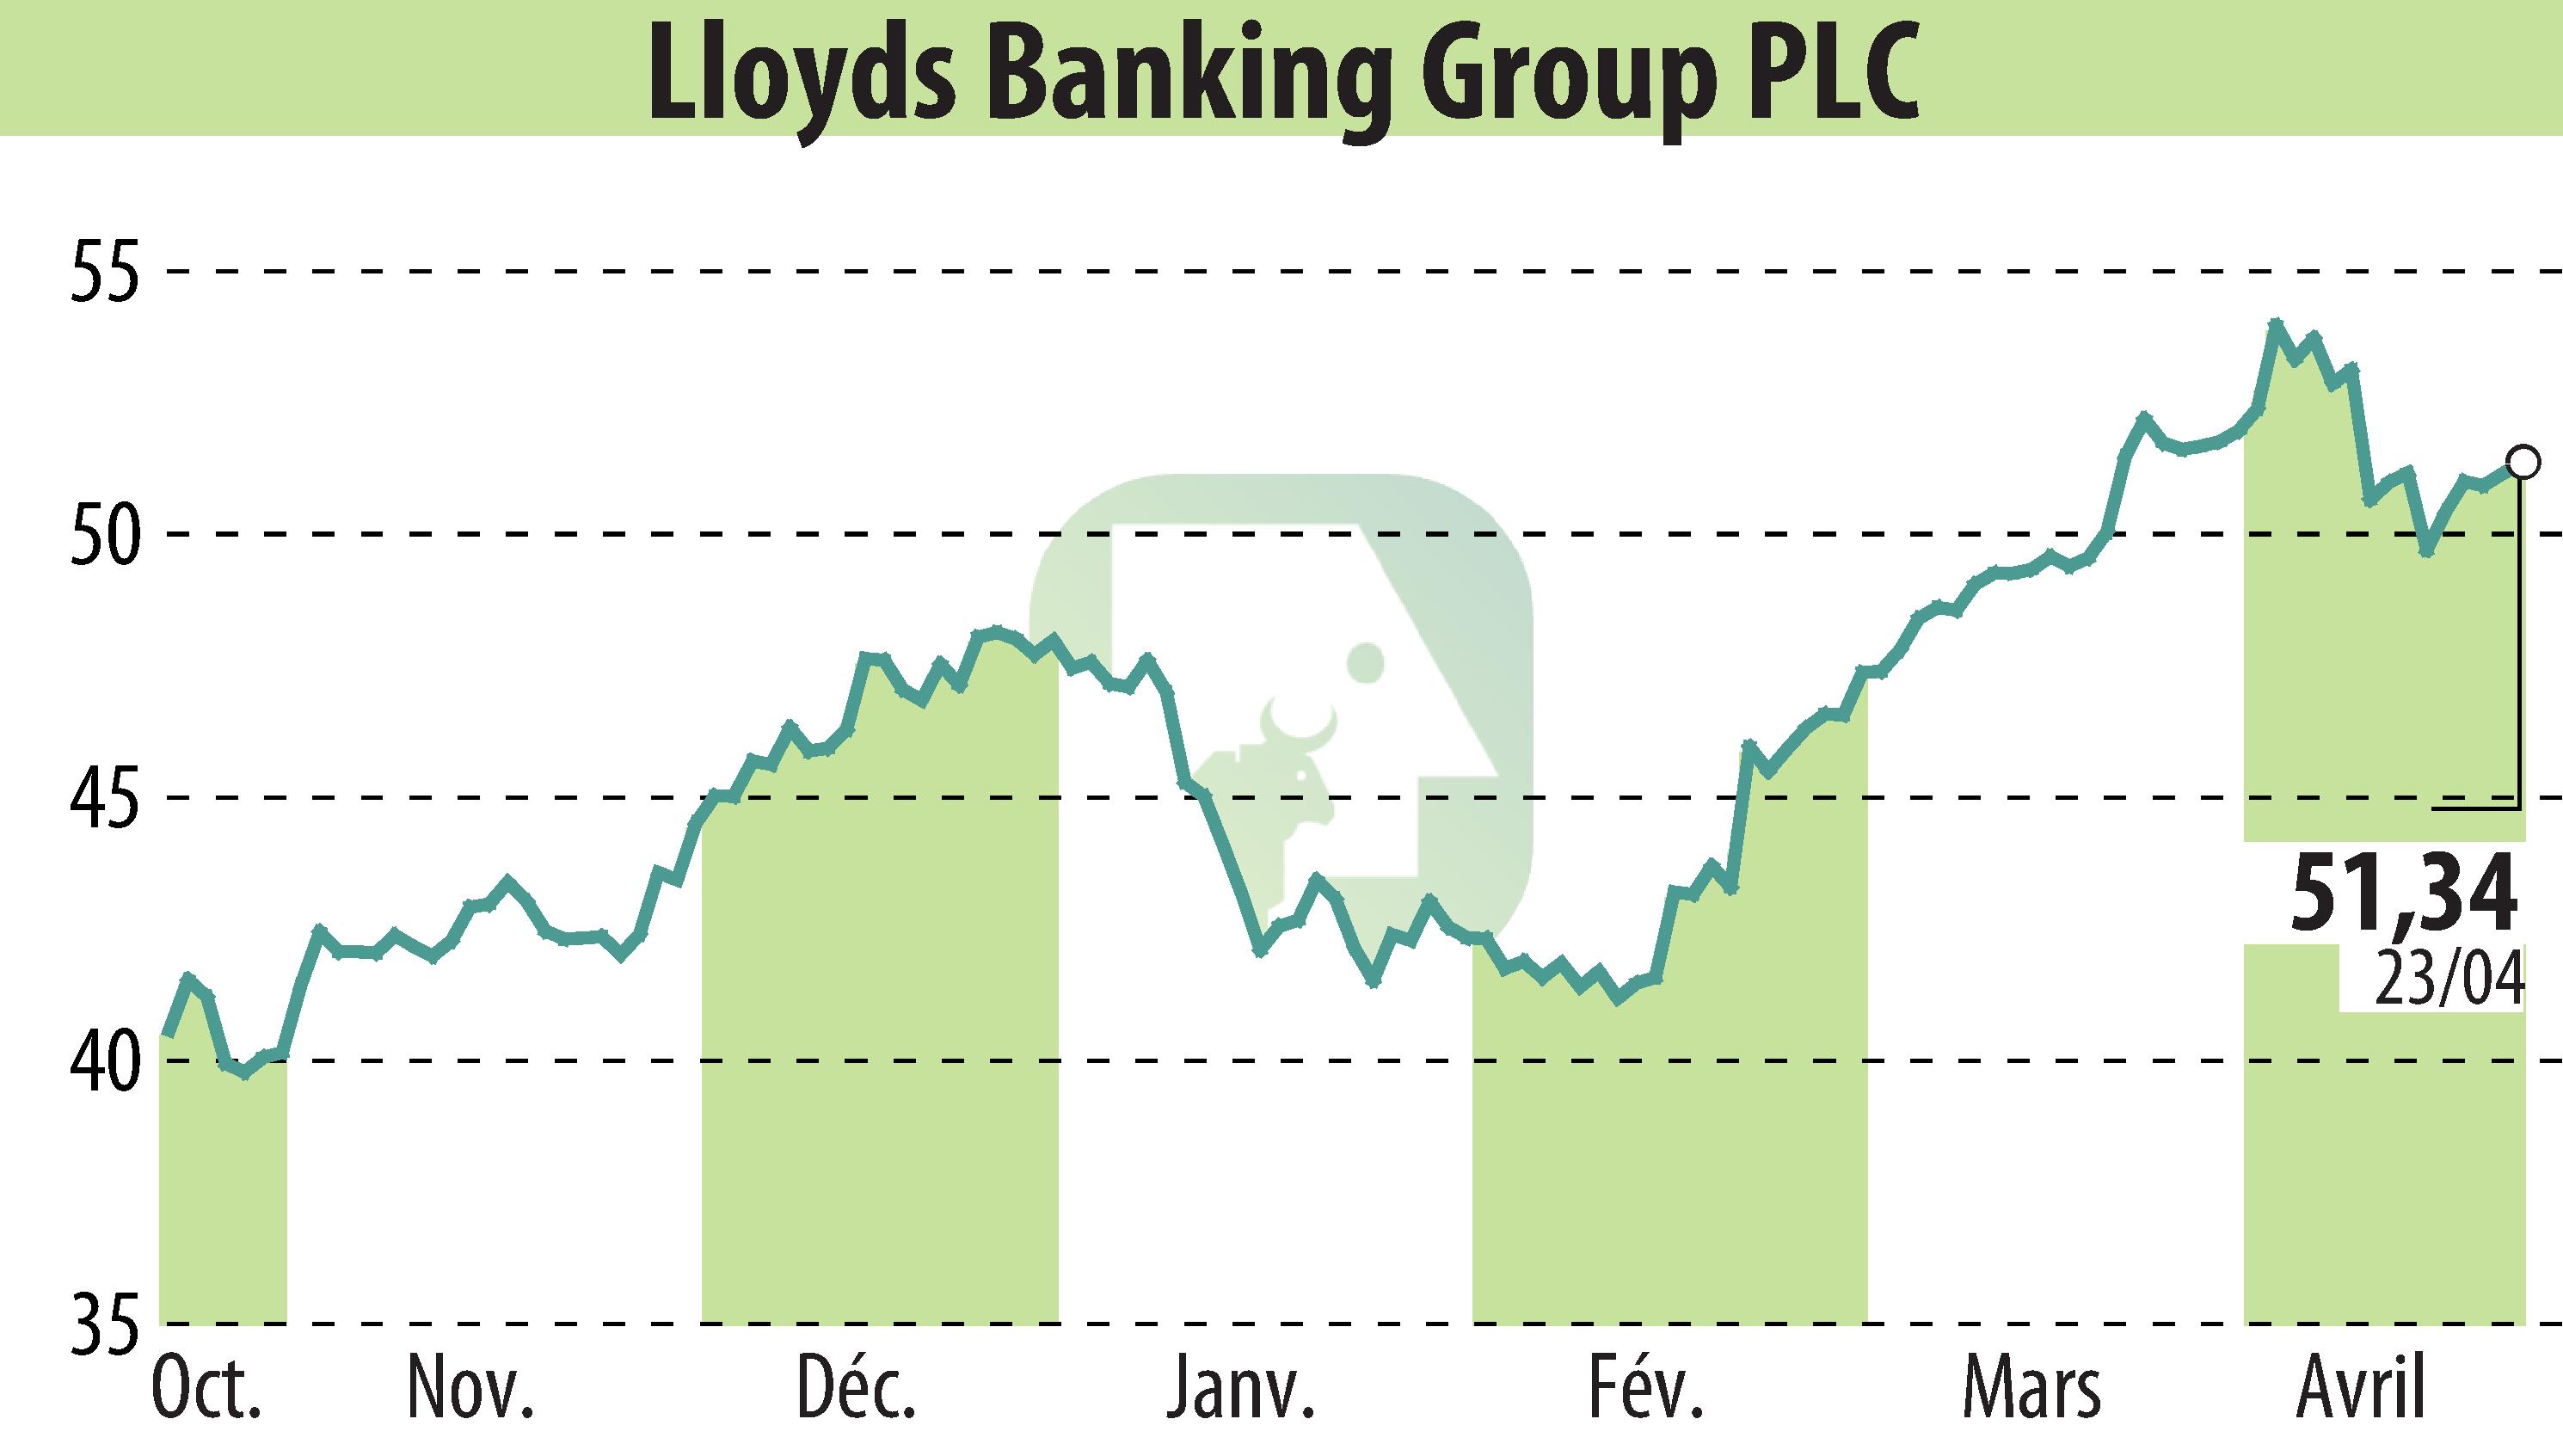 Stock price chart of Lloyds Banking Group (EBR:LLOY) showing fluctuations.